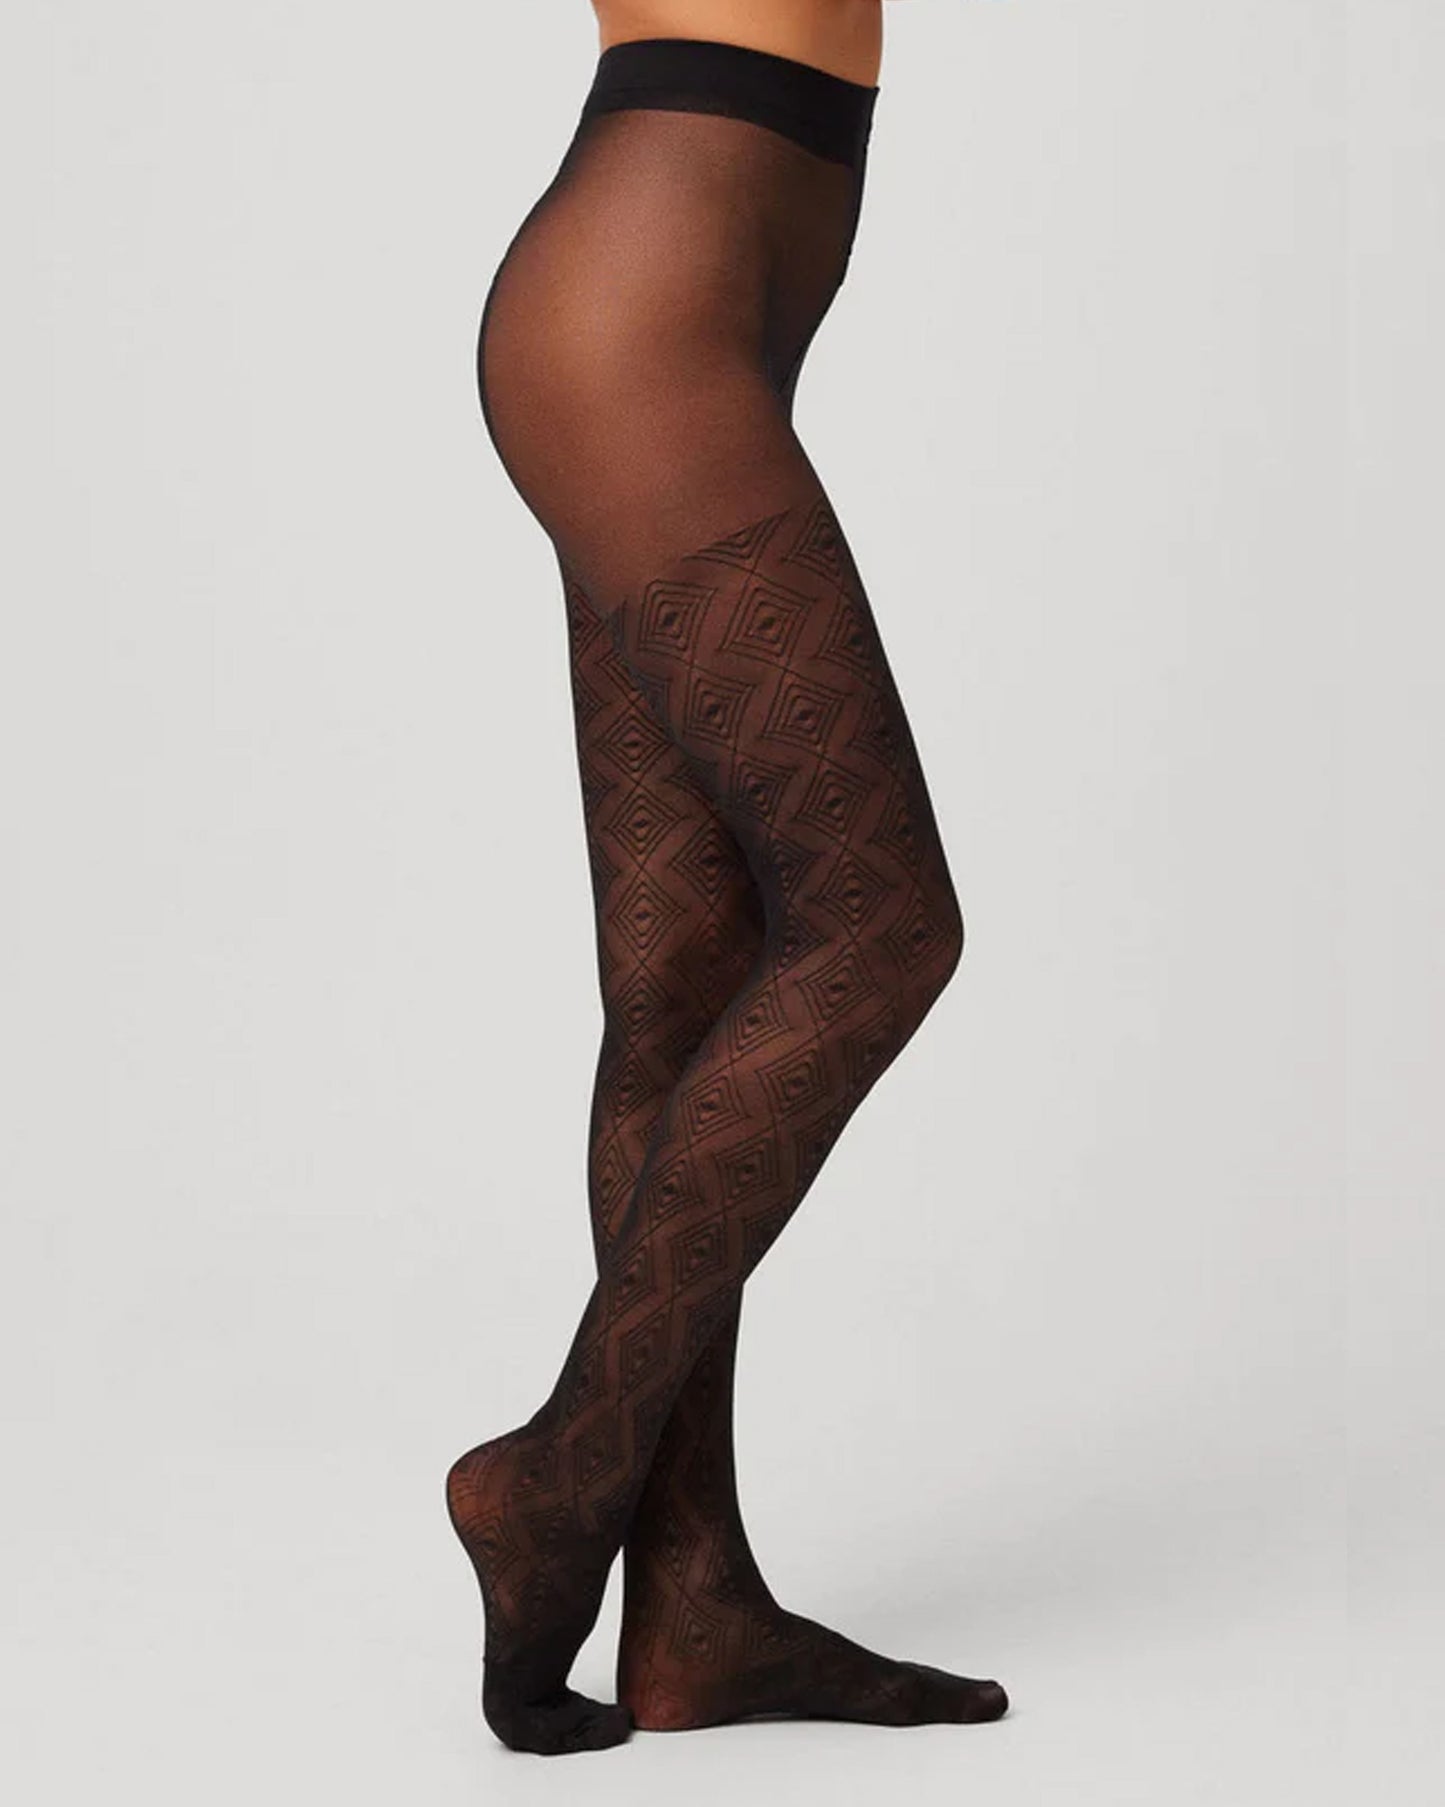 Ysabel Mora 16607 Diamond Tights - Sheer black fashion tights with an all over linear diamond pattern, plain top, flat seams, gusset and deep comfort waist band.